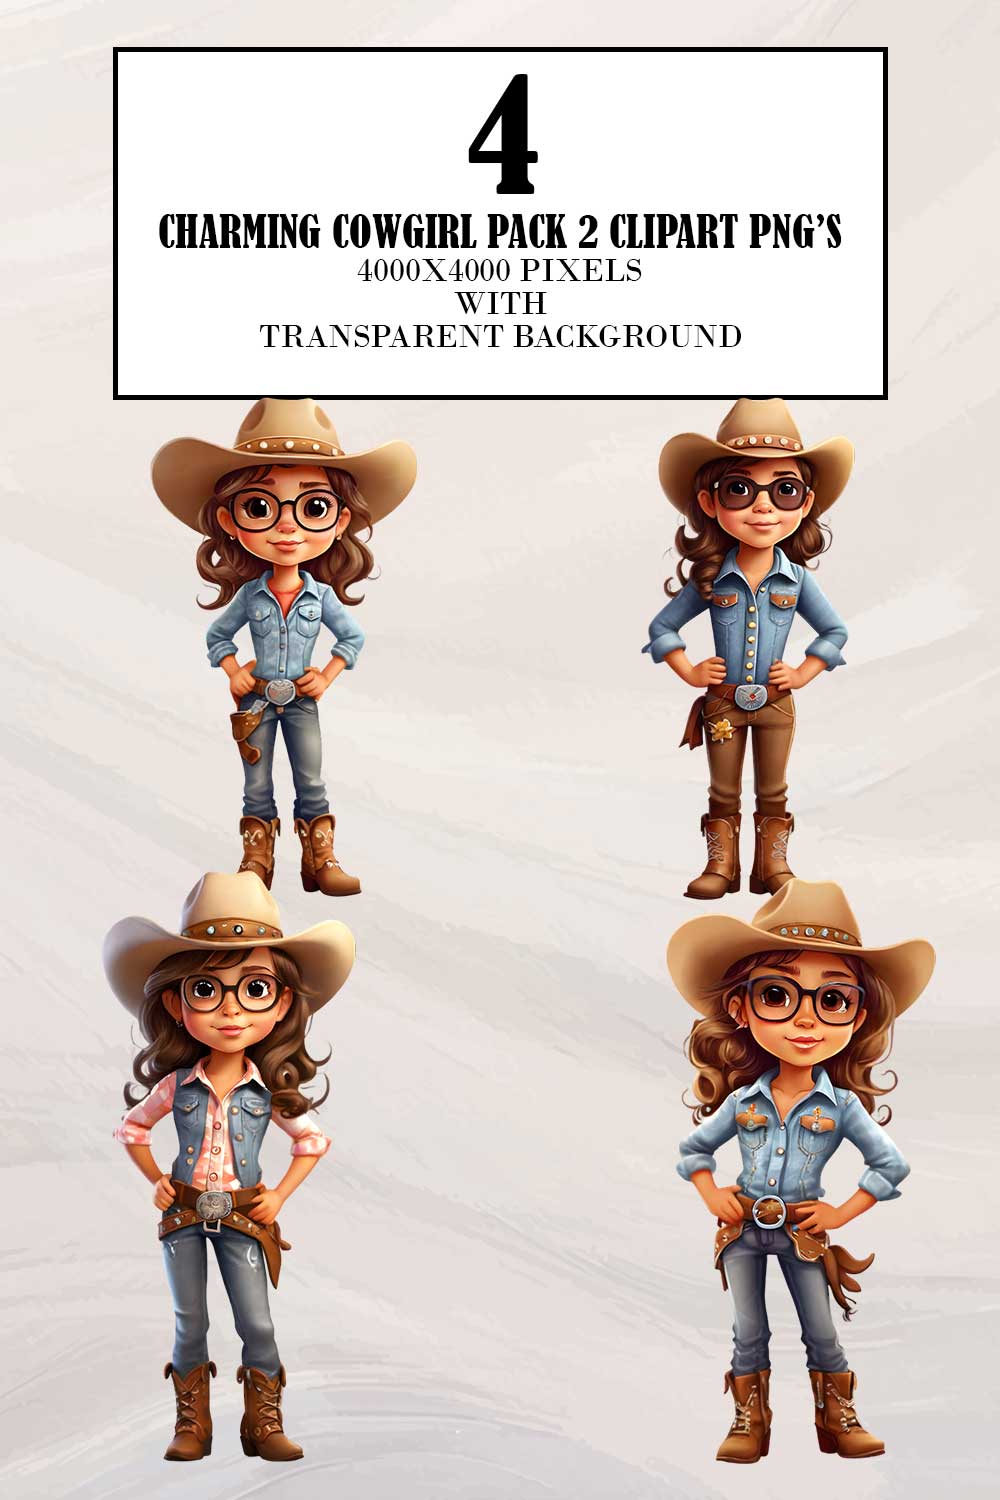 Charming Cowgirl Pack 2 pinterest preview image.